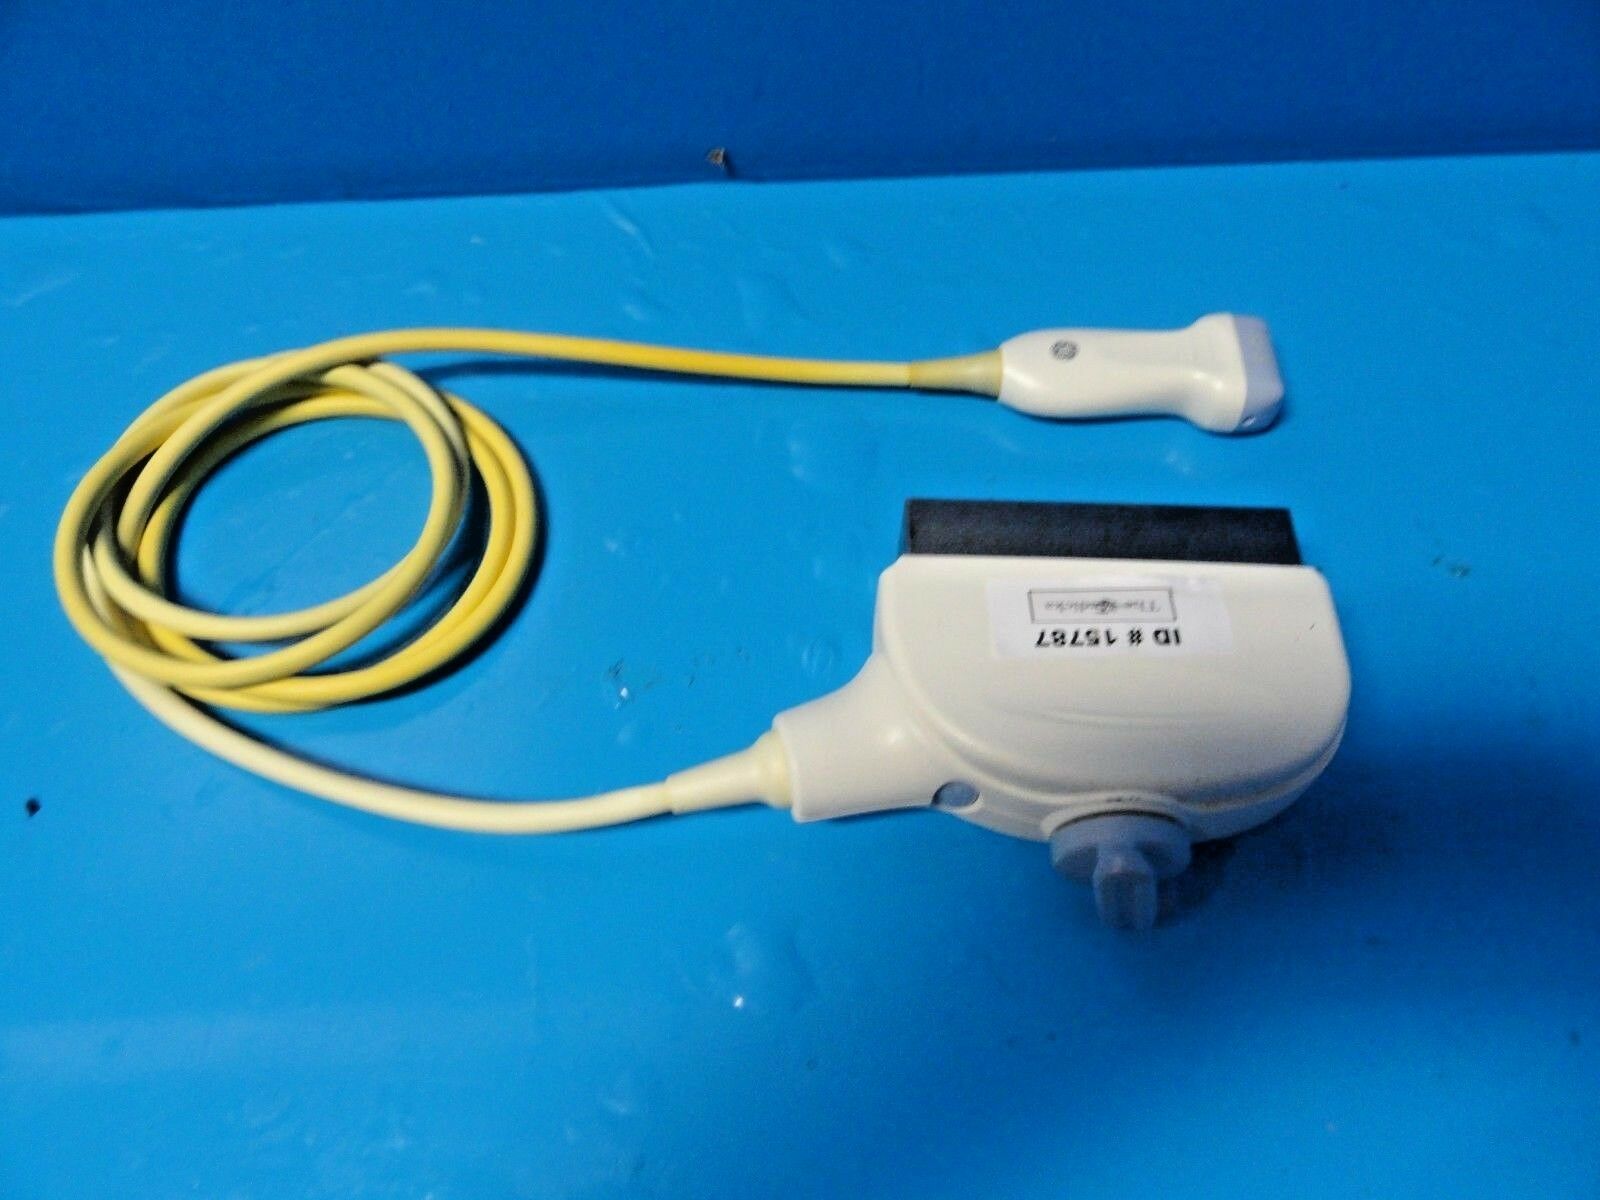 2011 GE S1-5 Sector Array Ultrasound Transducer Probe P/N 5269878   ~15787 DIAGNOSTIC ULTRASOUND MACHINES FOR SALE